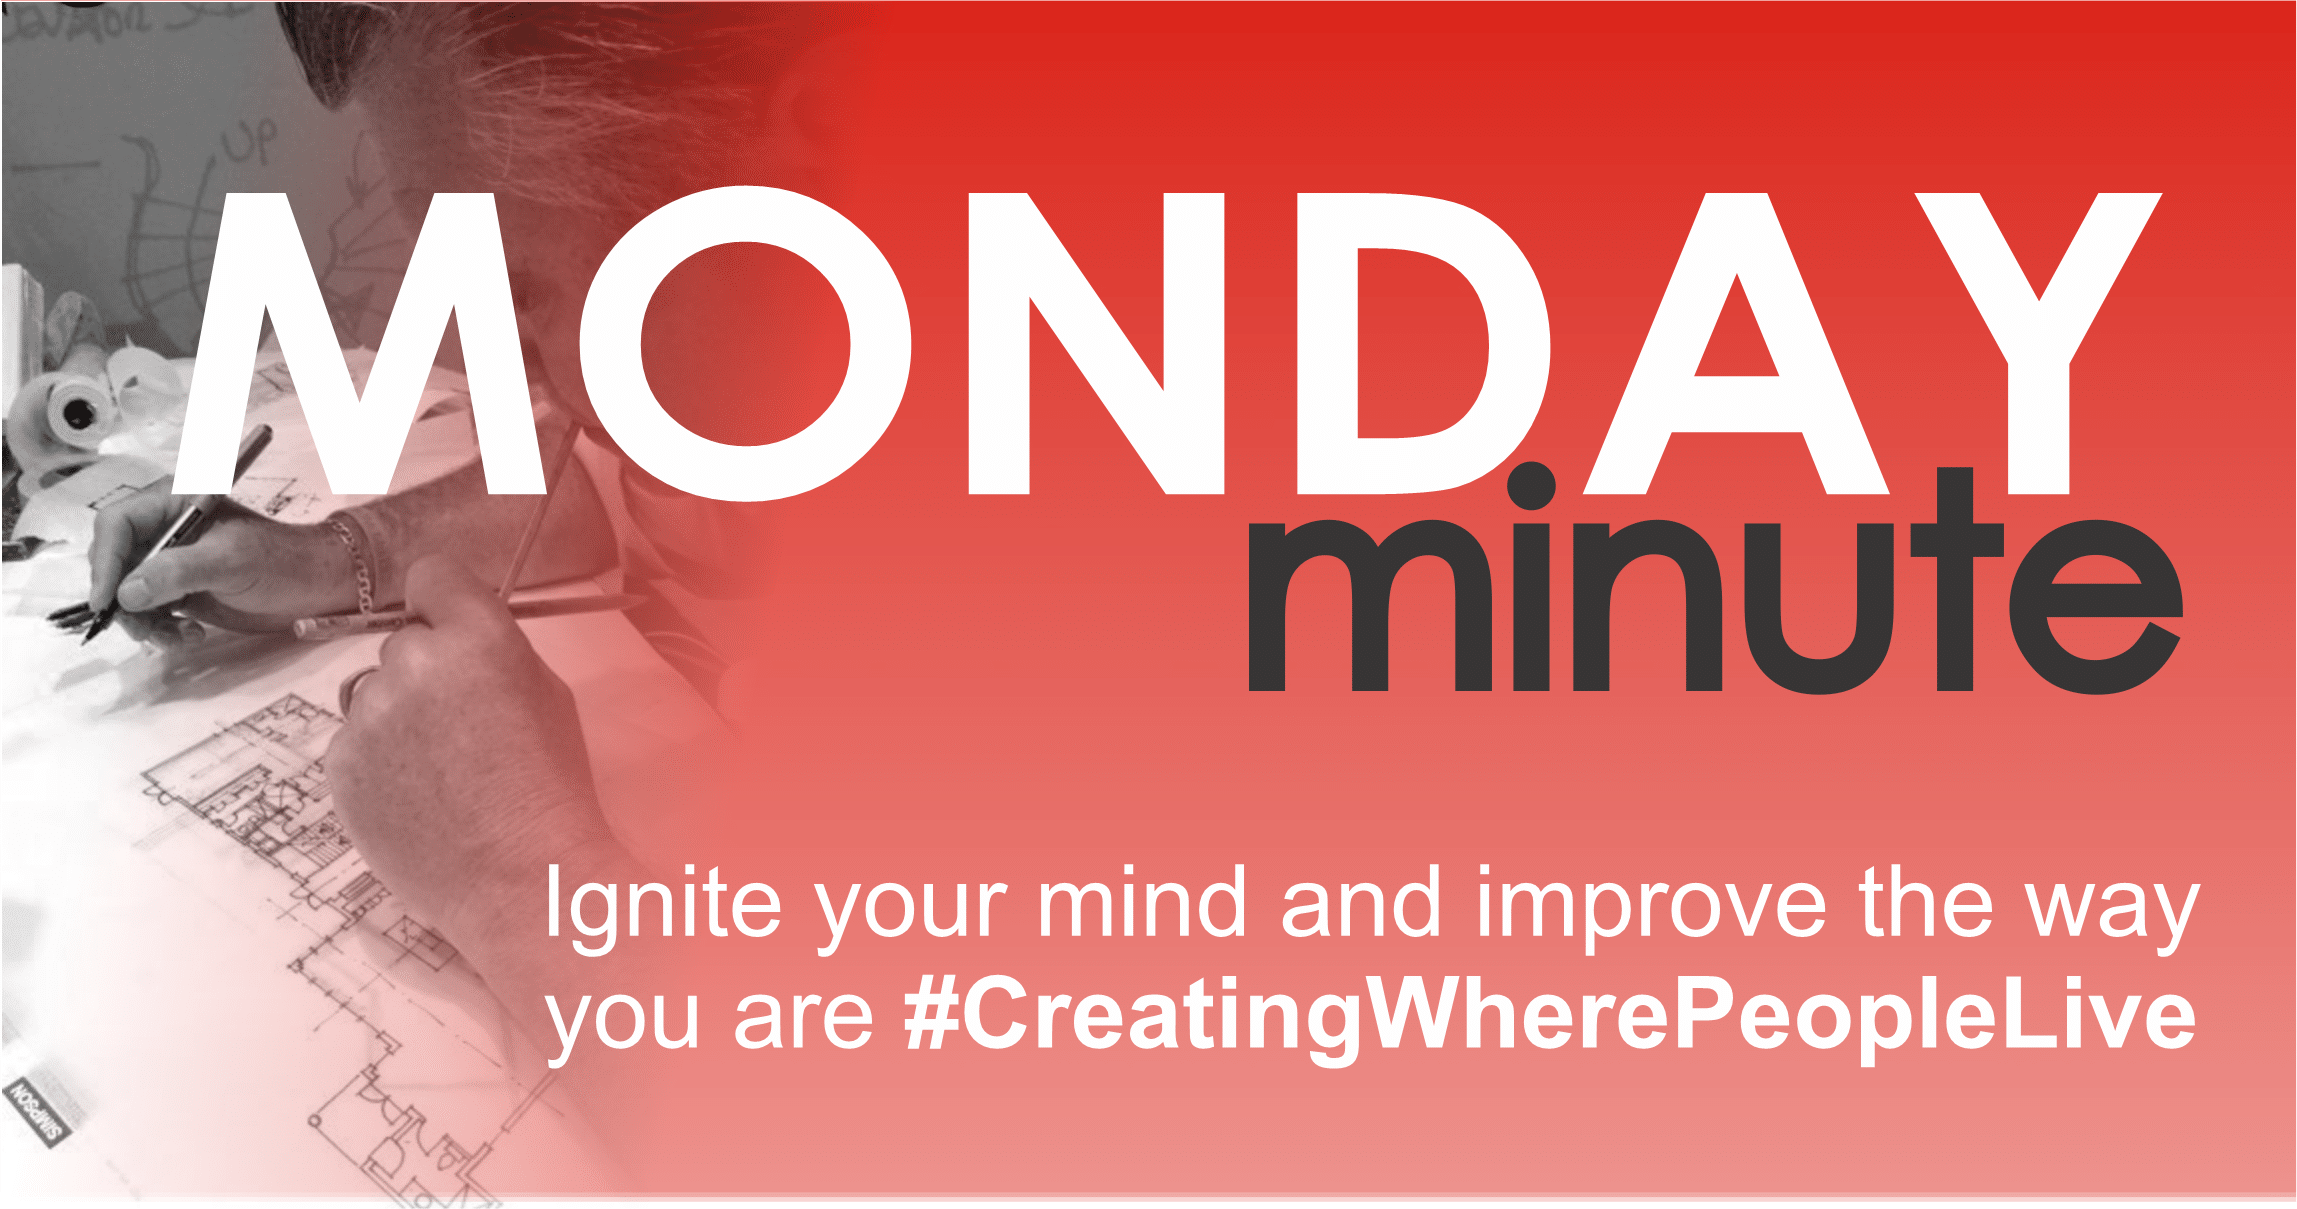 Stock photo of person drawing with red gradient overlay. Text says, "Monday Minute. Ignite your mind and improve where you are #CreatingWherePeopleLive."